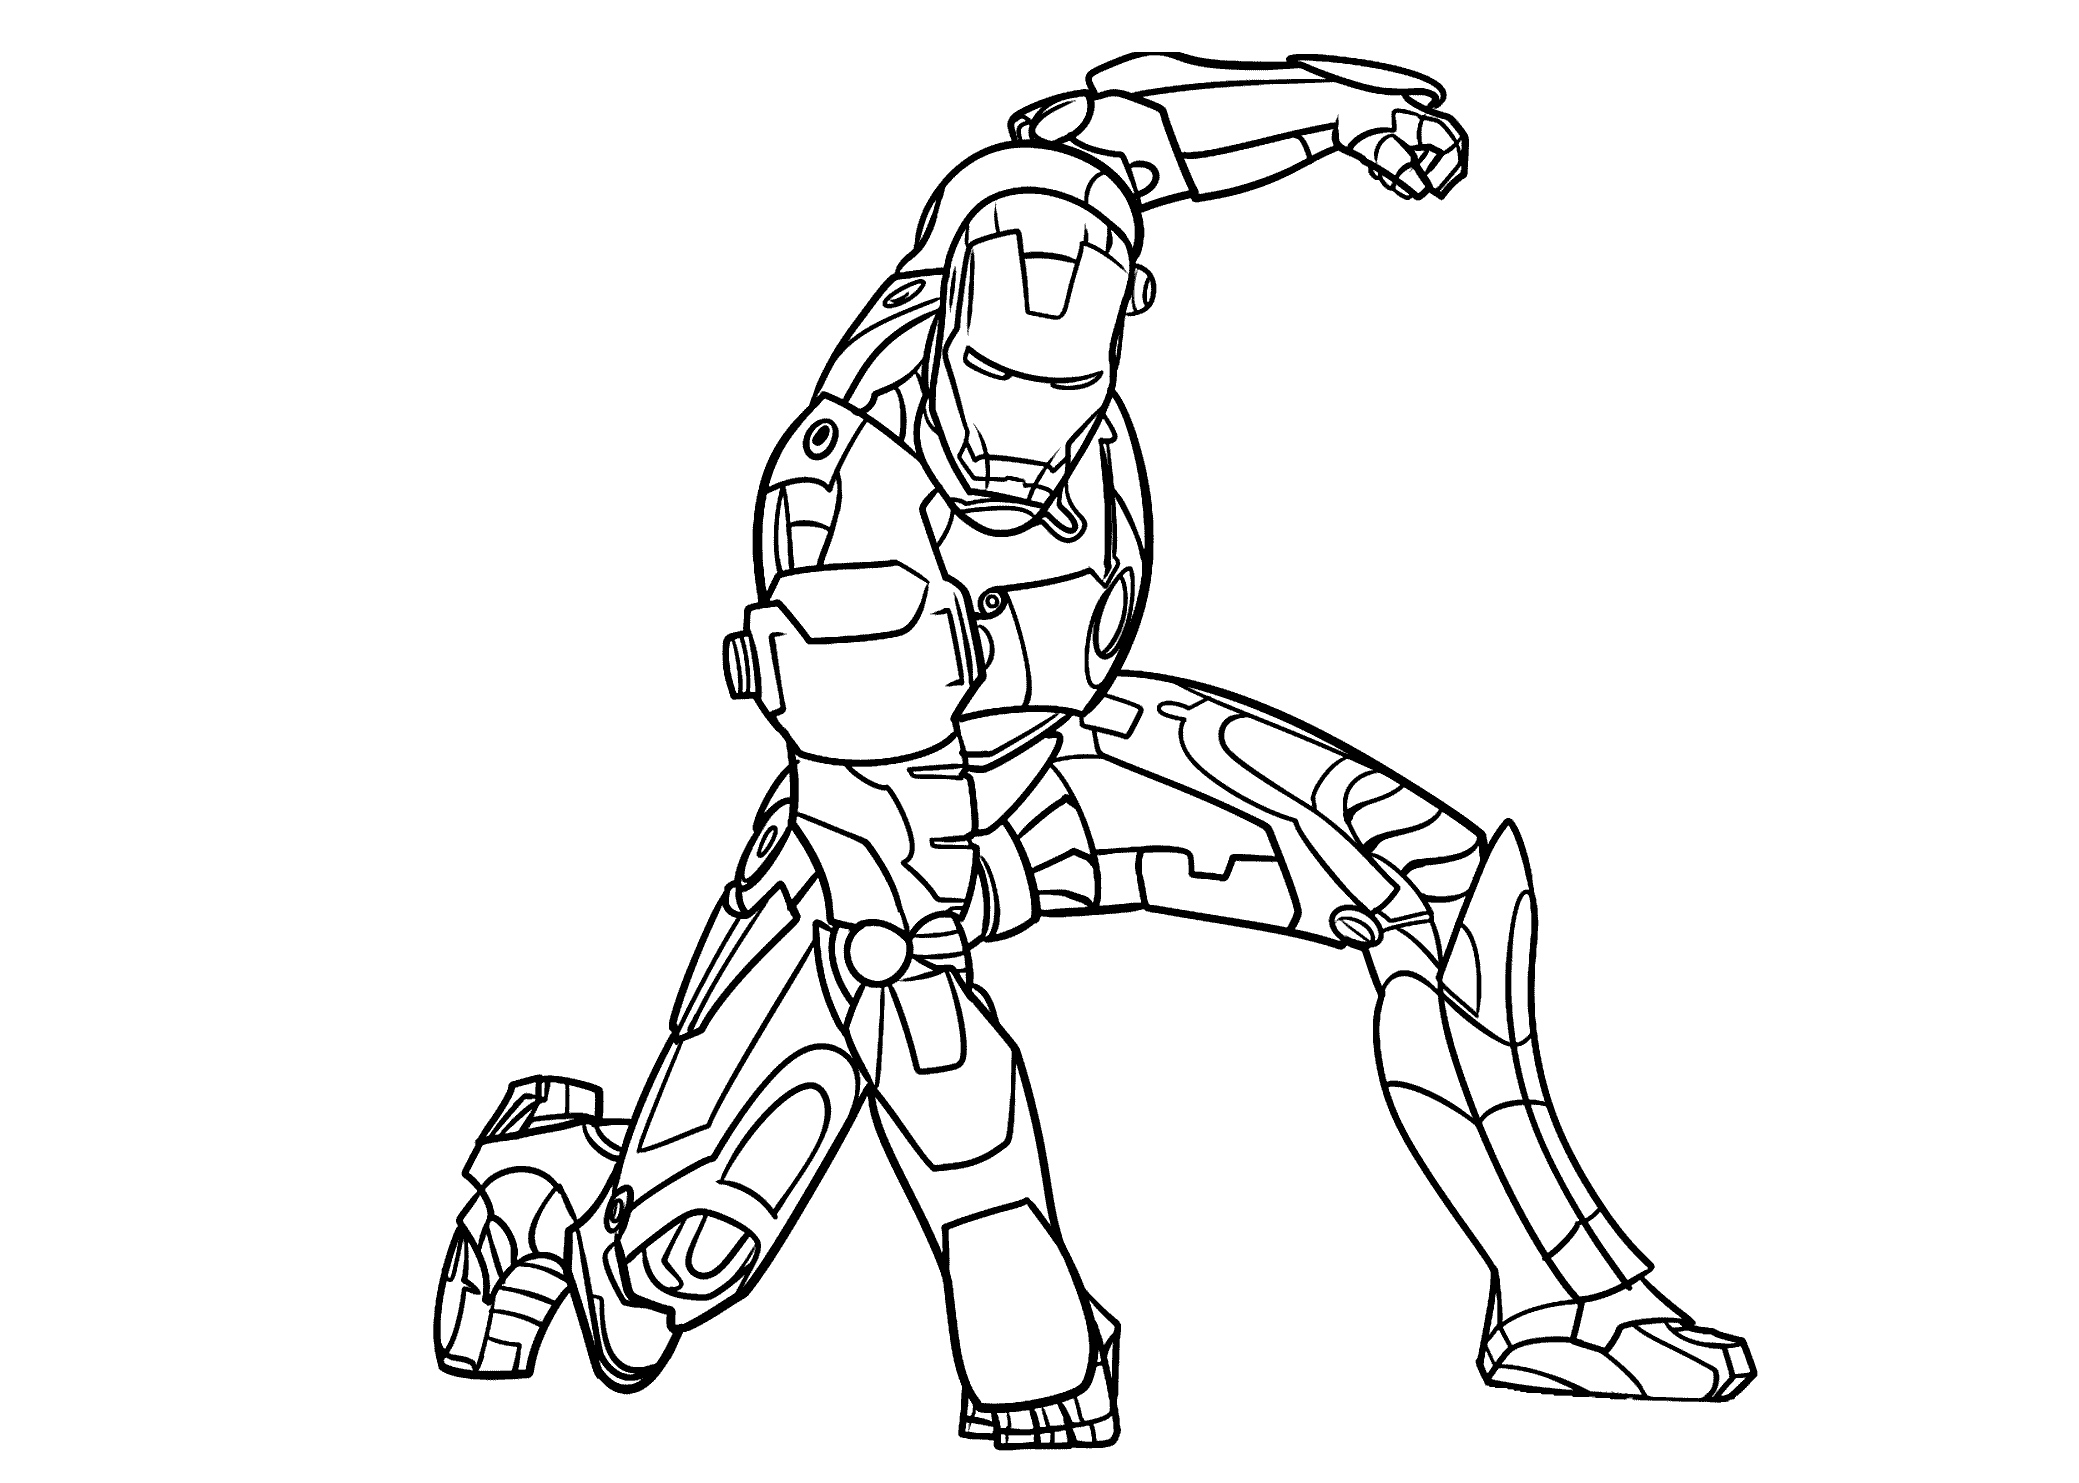 Iron Man Coloring Pages Free Printable   Coloring Home